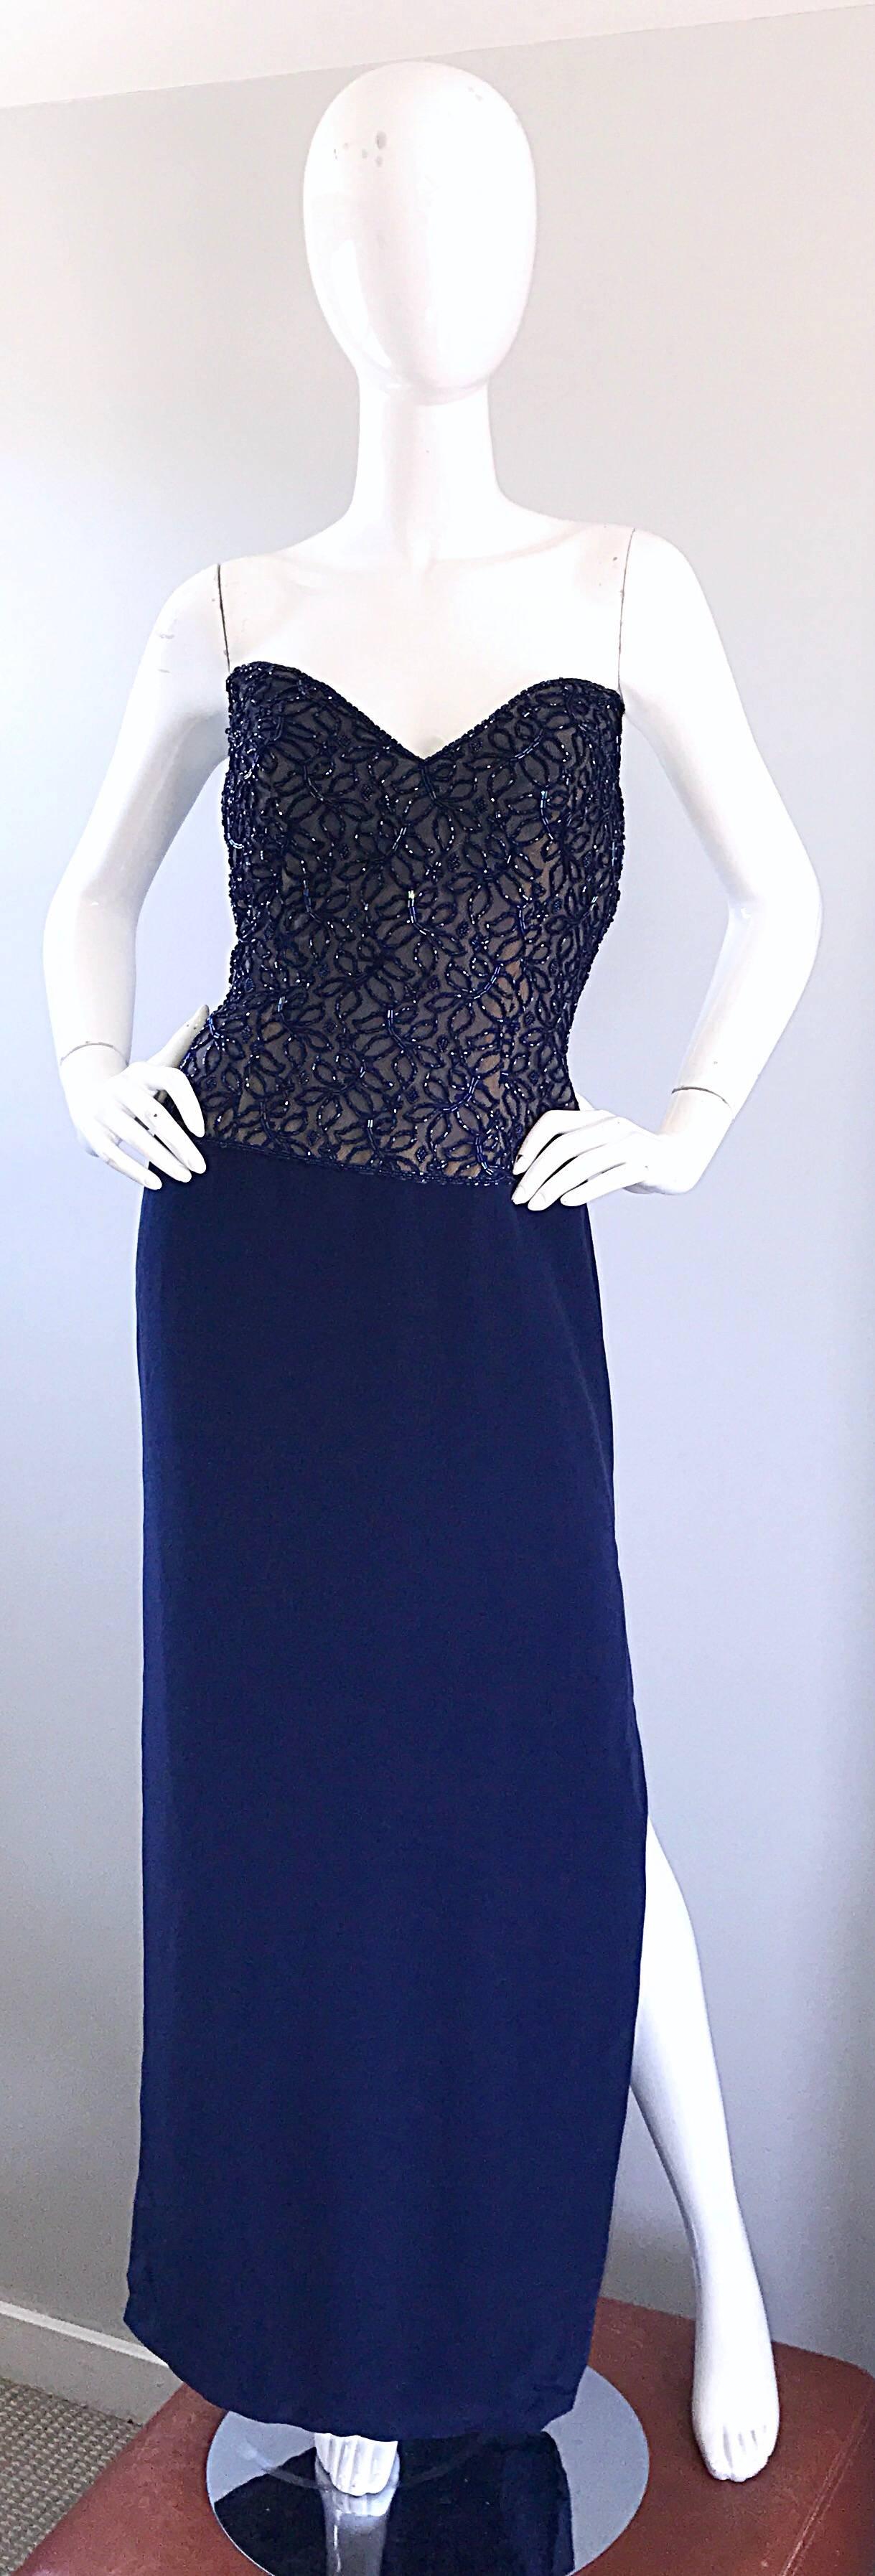 Stunning vintage BOB MACKIE navy blue strapless beaded and sequinened Grecian inspired evening dress! Features hundreds of beads sewn onto navy a navy mesh, with a boned nude underlay. Sexy slit reveals just the right amount of skin. Hidden zipper